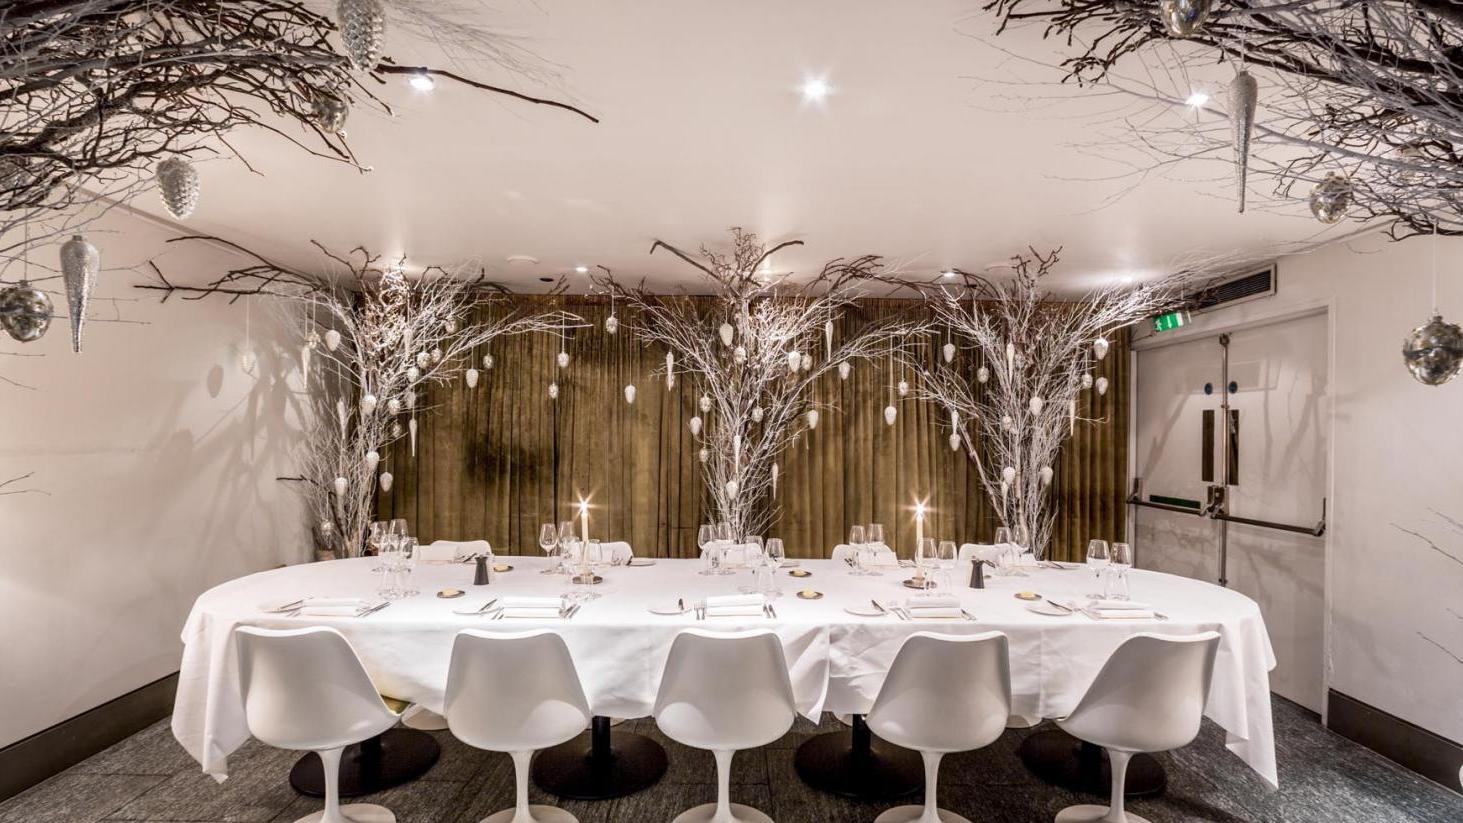 Find your Christmas Party Venue in East London